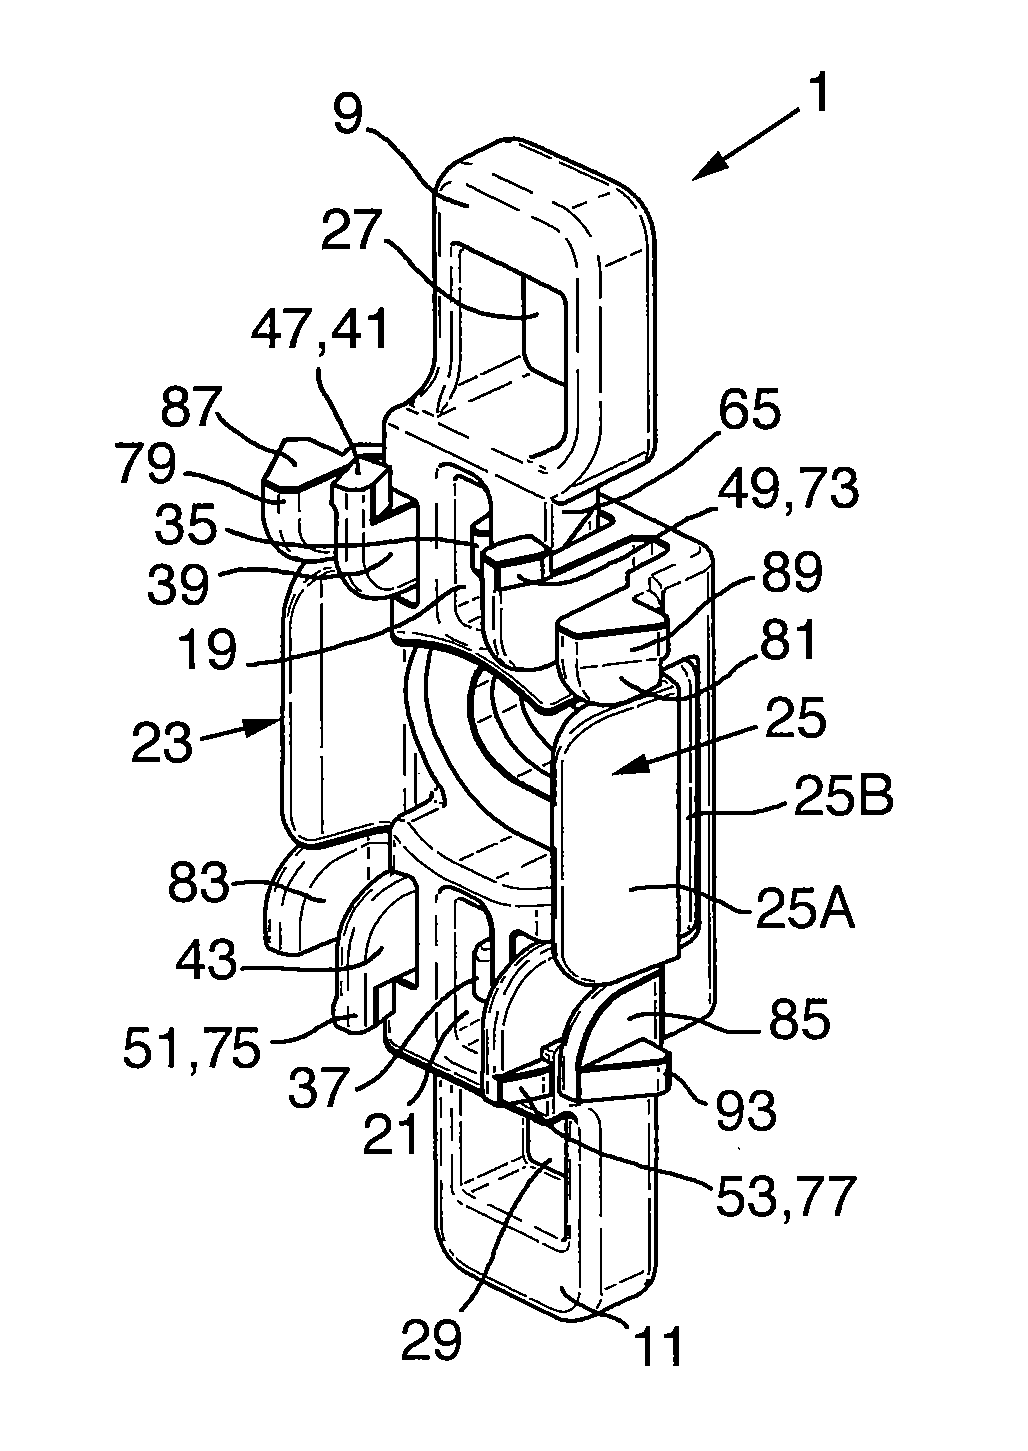 Bracket for mounting a guiding rail